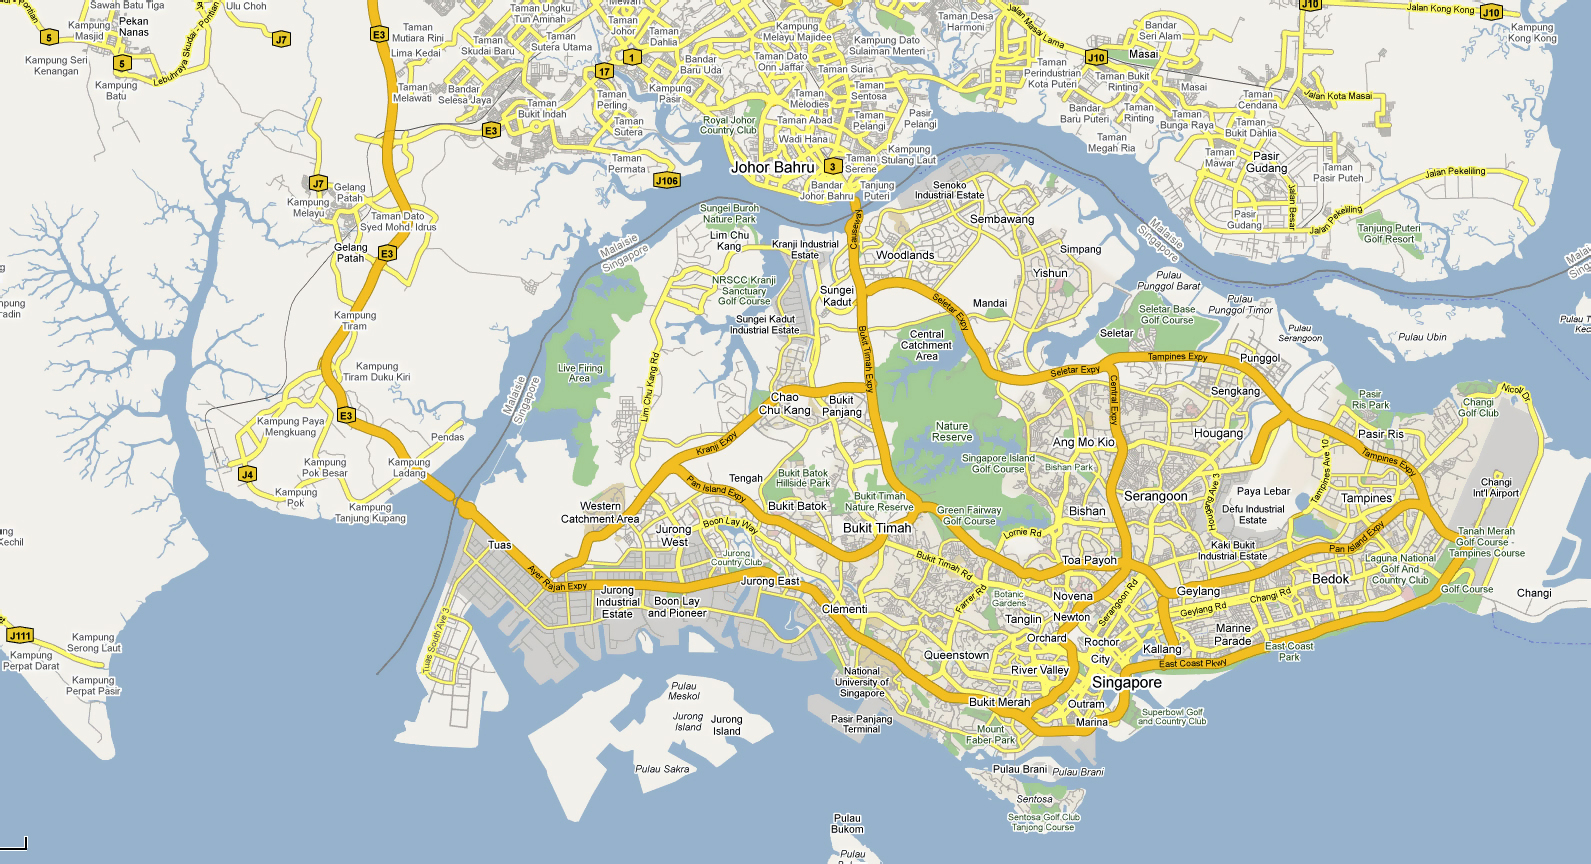 Singapore Attractions Map Printable